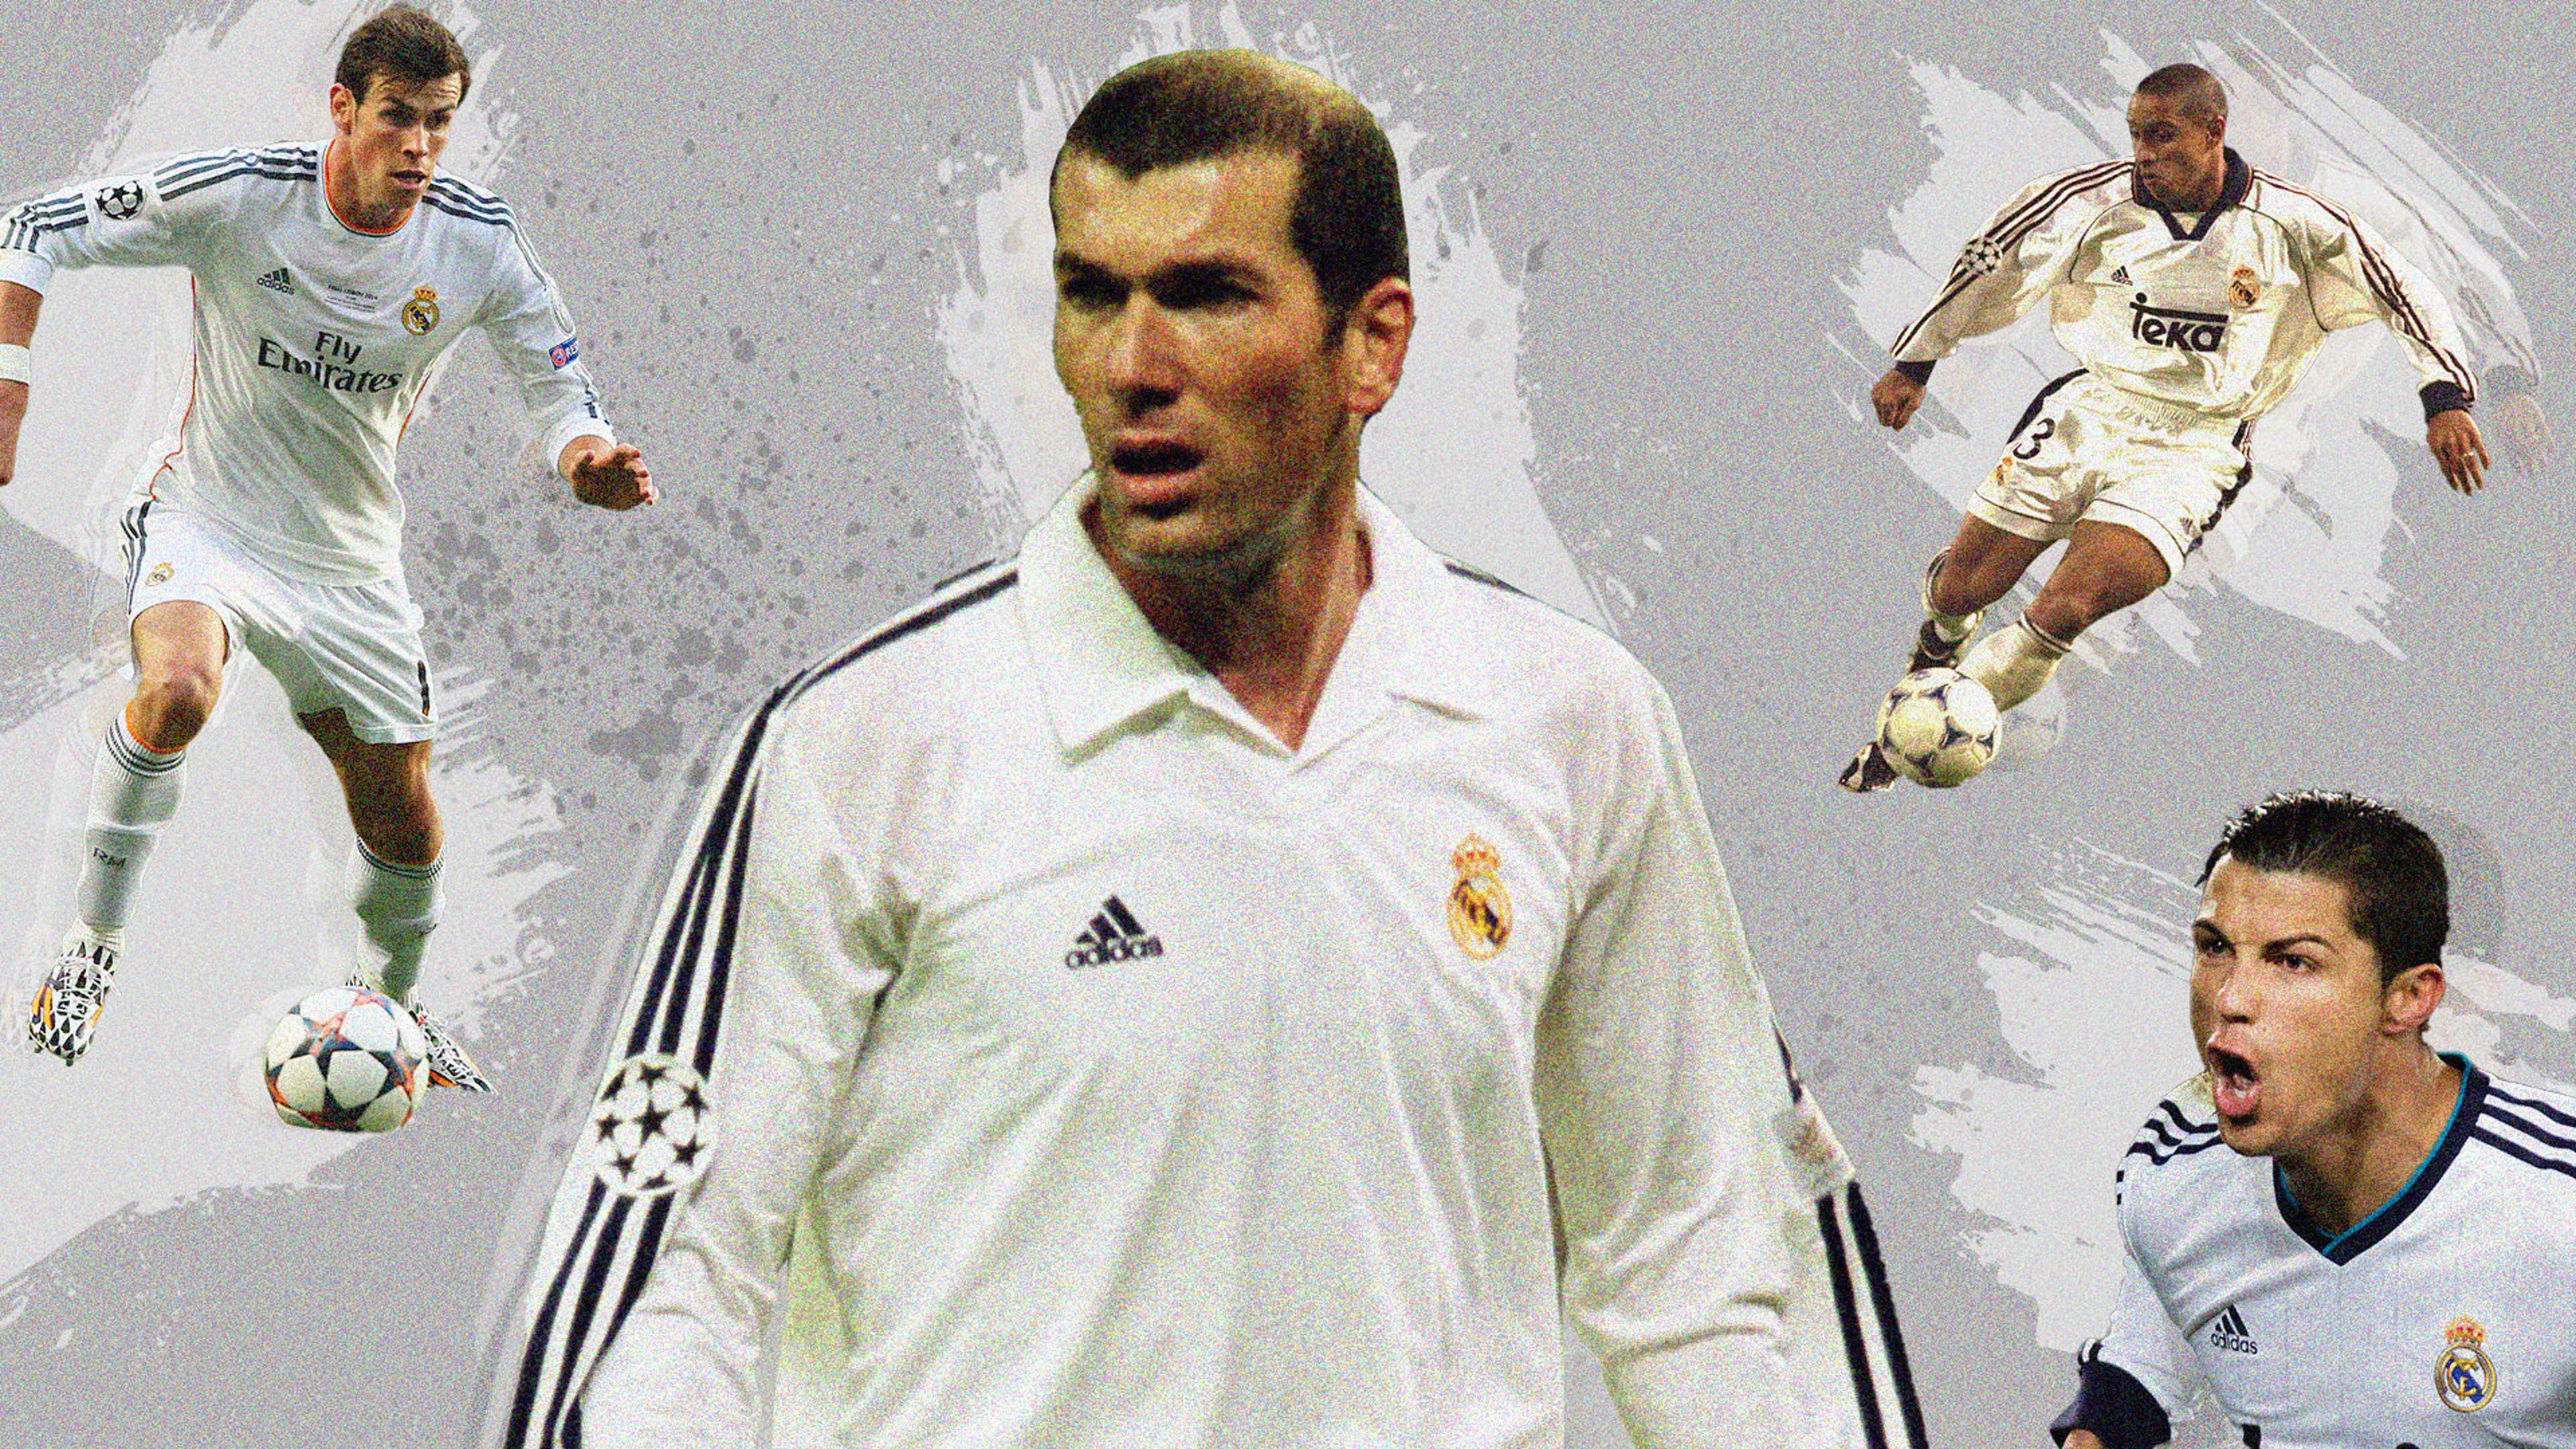 Real Madrid's top 10 home kits of all time - ranked